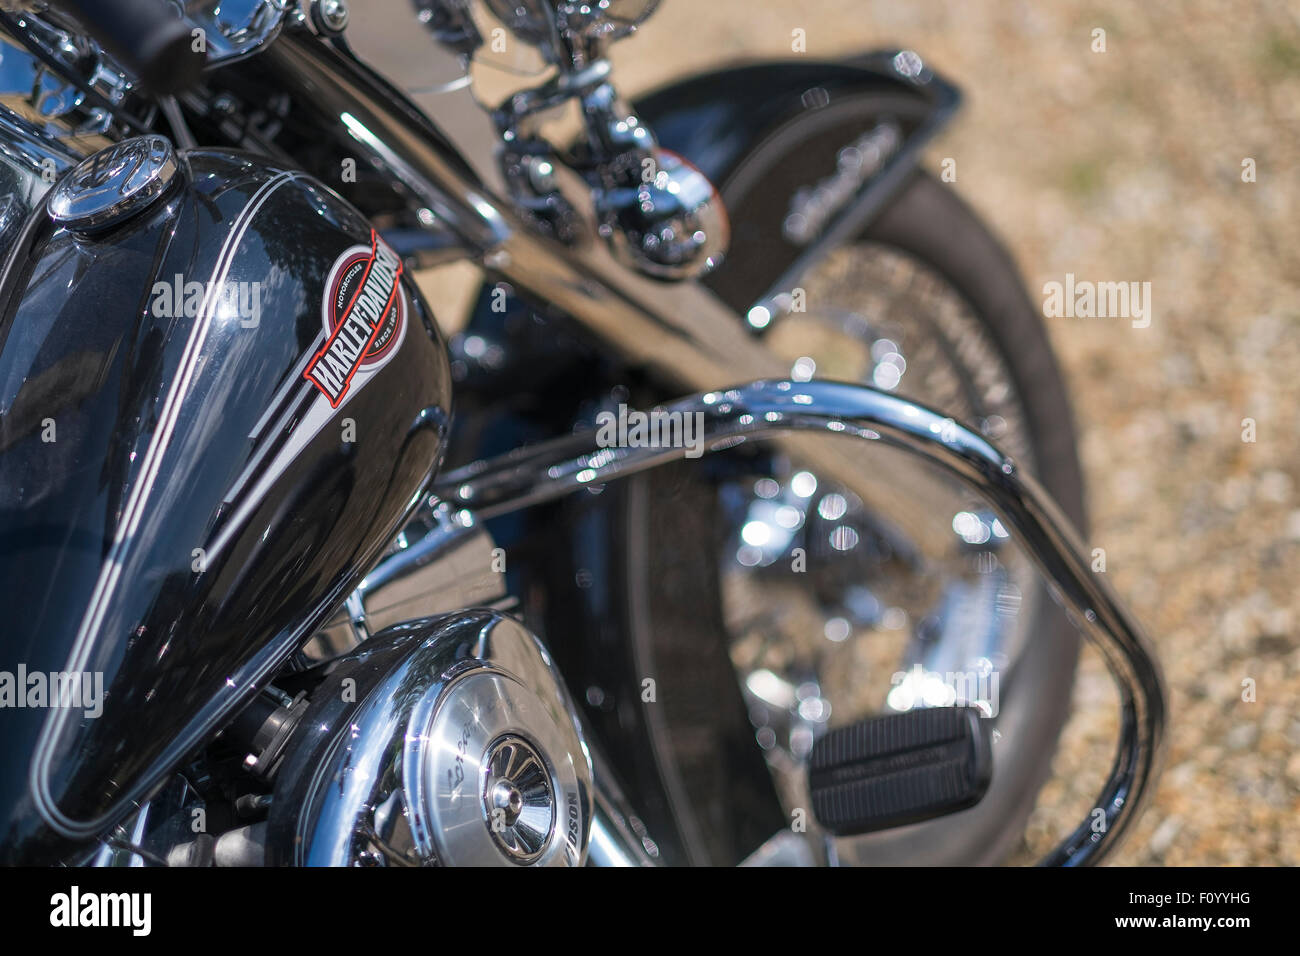 A close-up picture of a Harley Davidson motor cycle fuel tank and ...